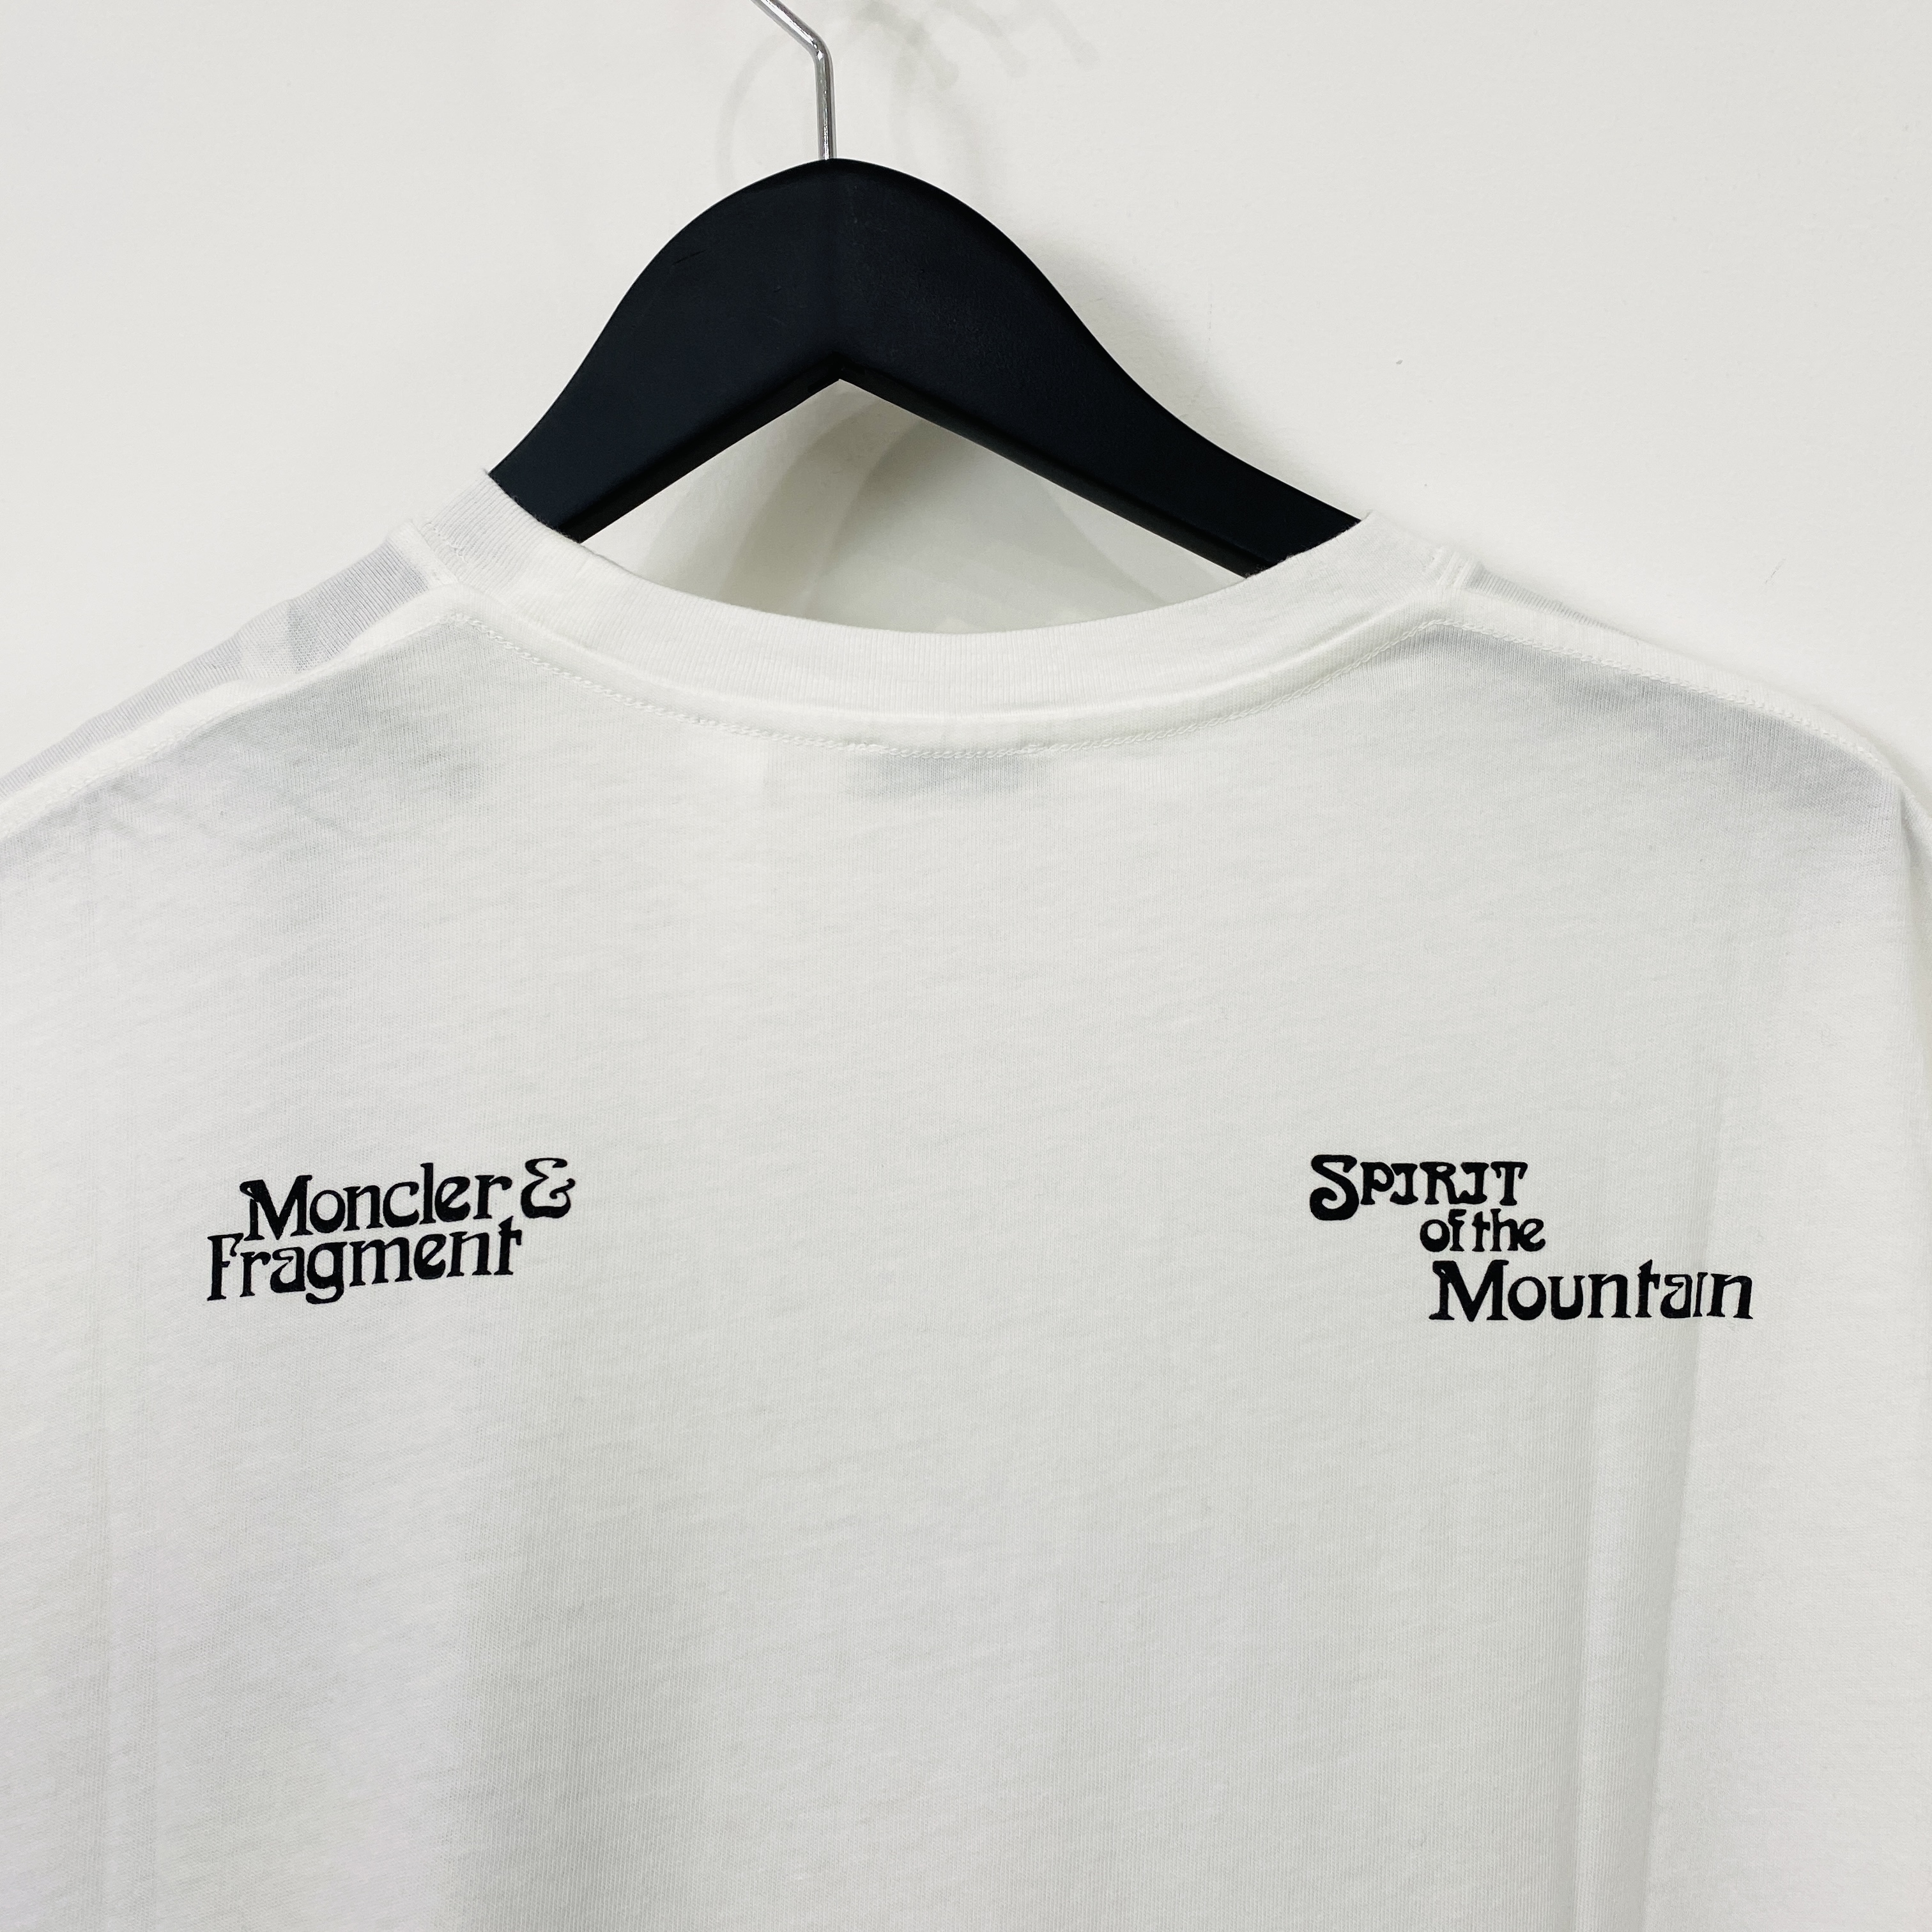 【MONCLER×Fragment】モンクレール×フラグメント / MAGLIA T-SHIRT / WHITE / 半袖Tシャツ